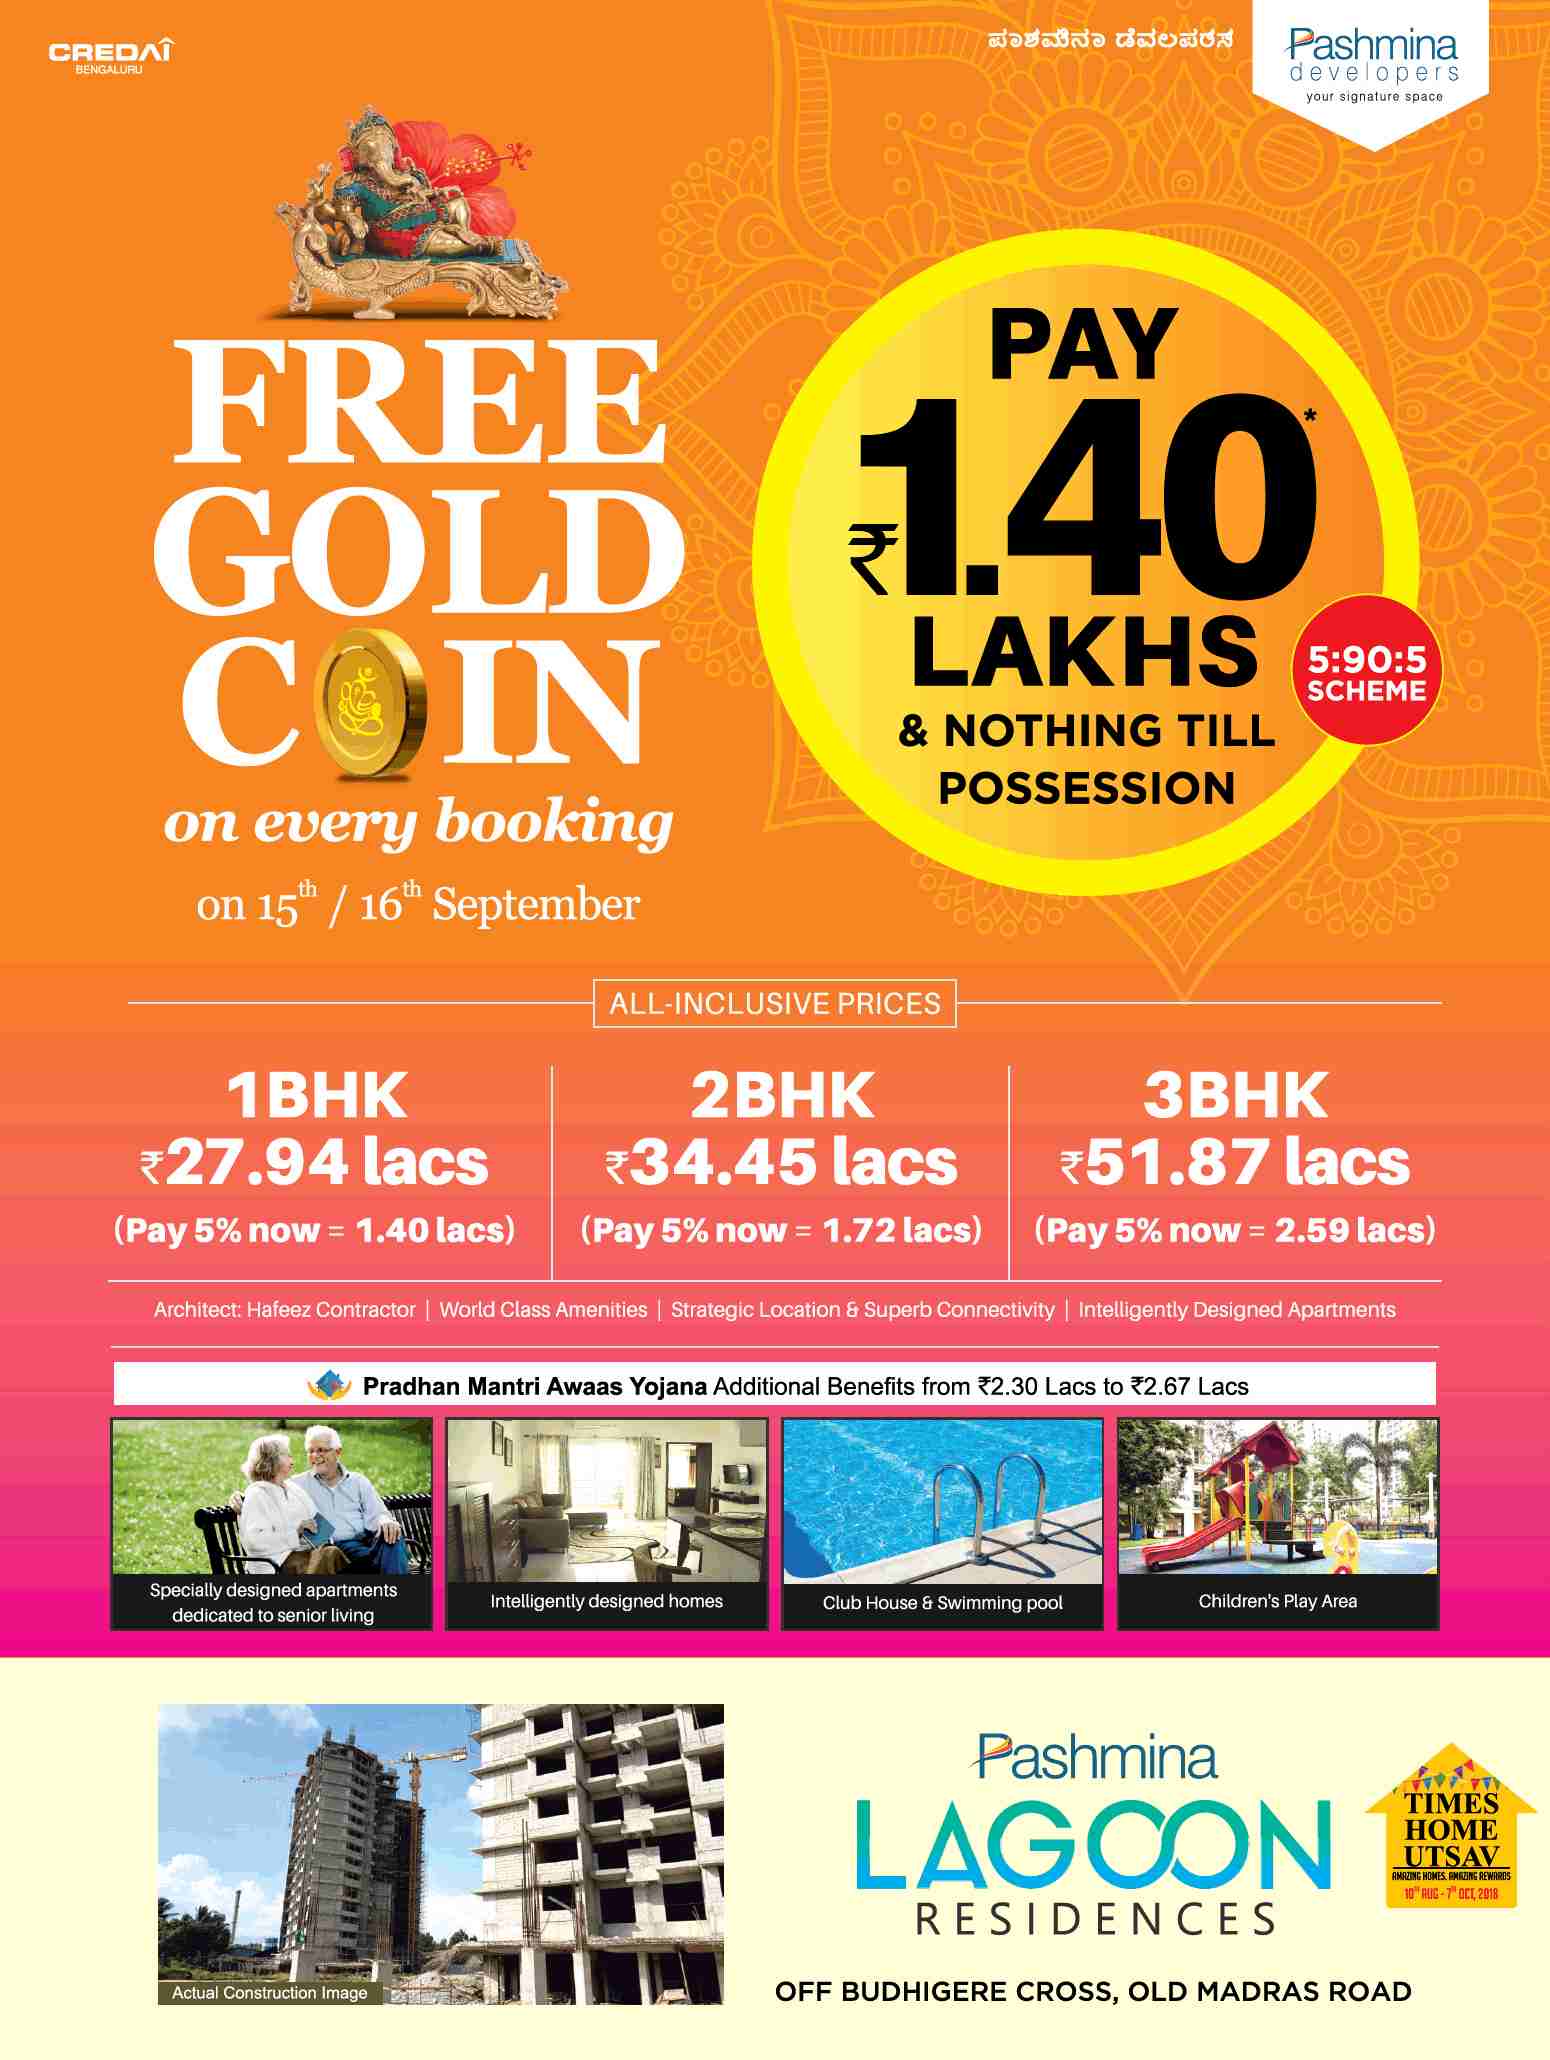 Avail 5:90:5 payment scheme at Pashmina Lagoon Residences in Bangalore Update